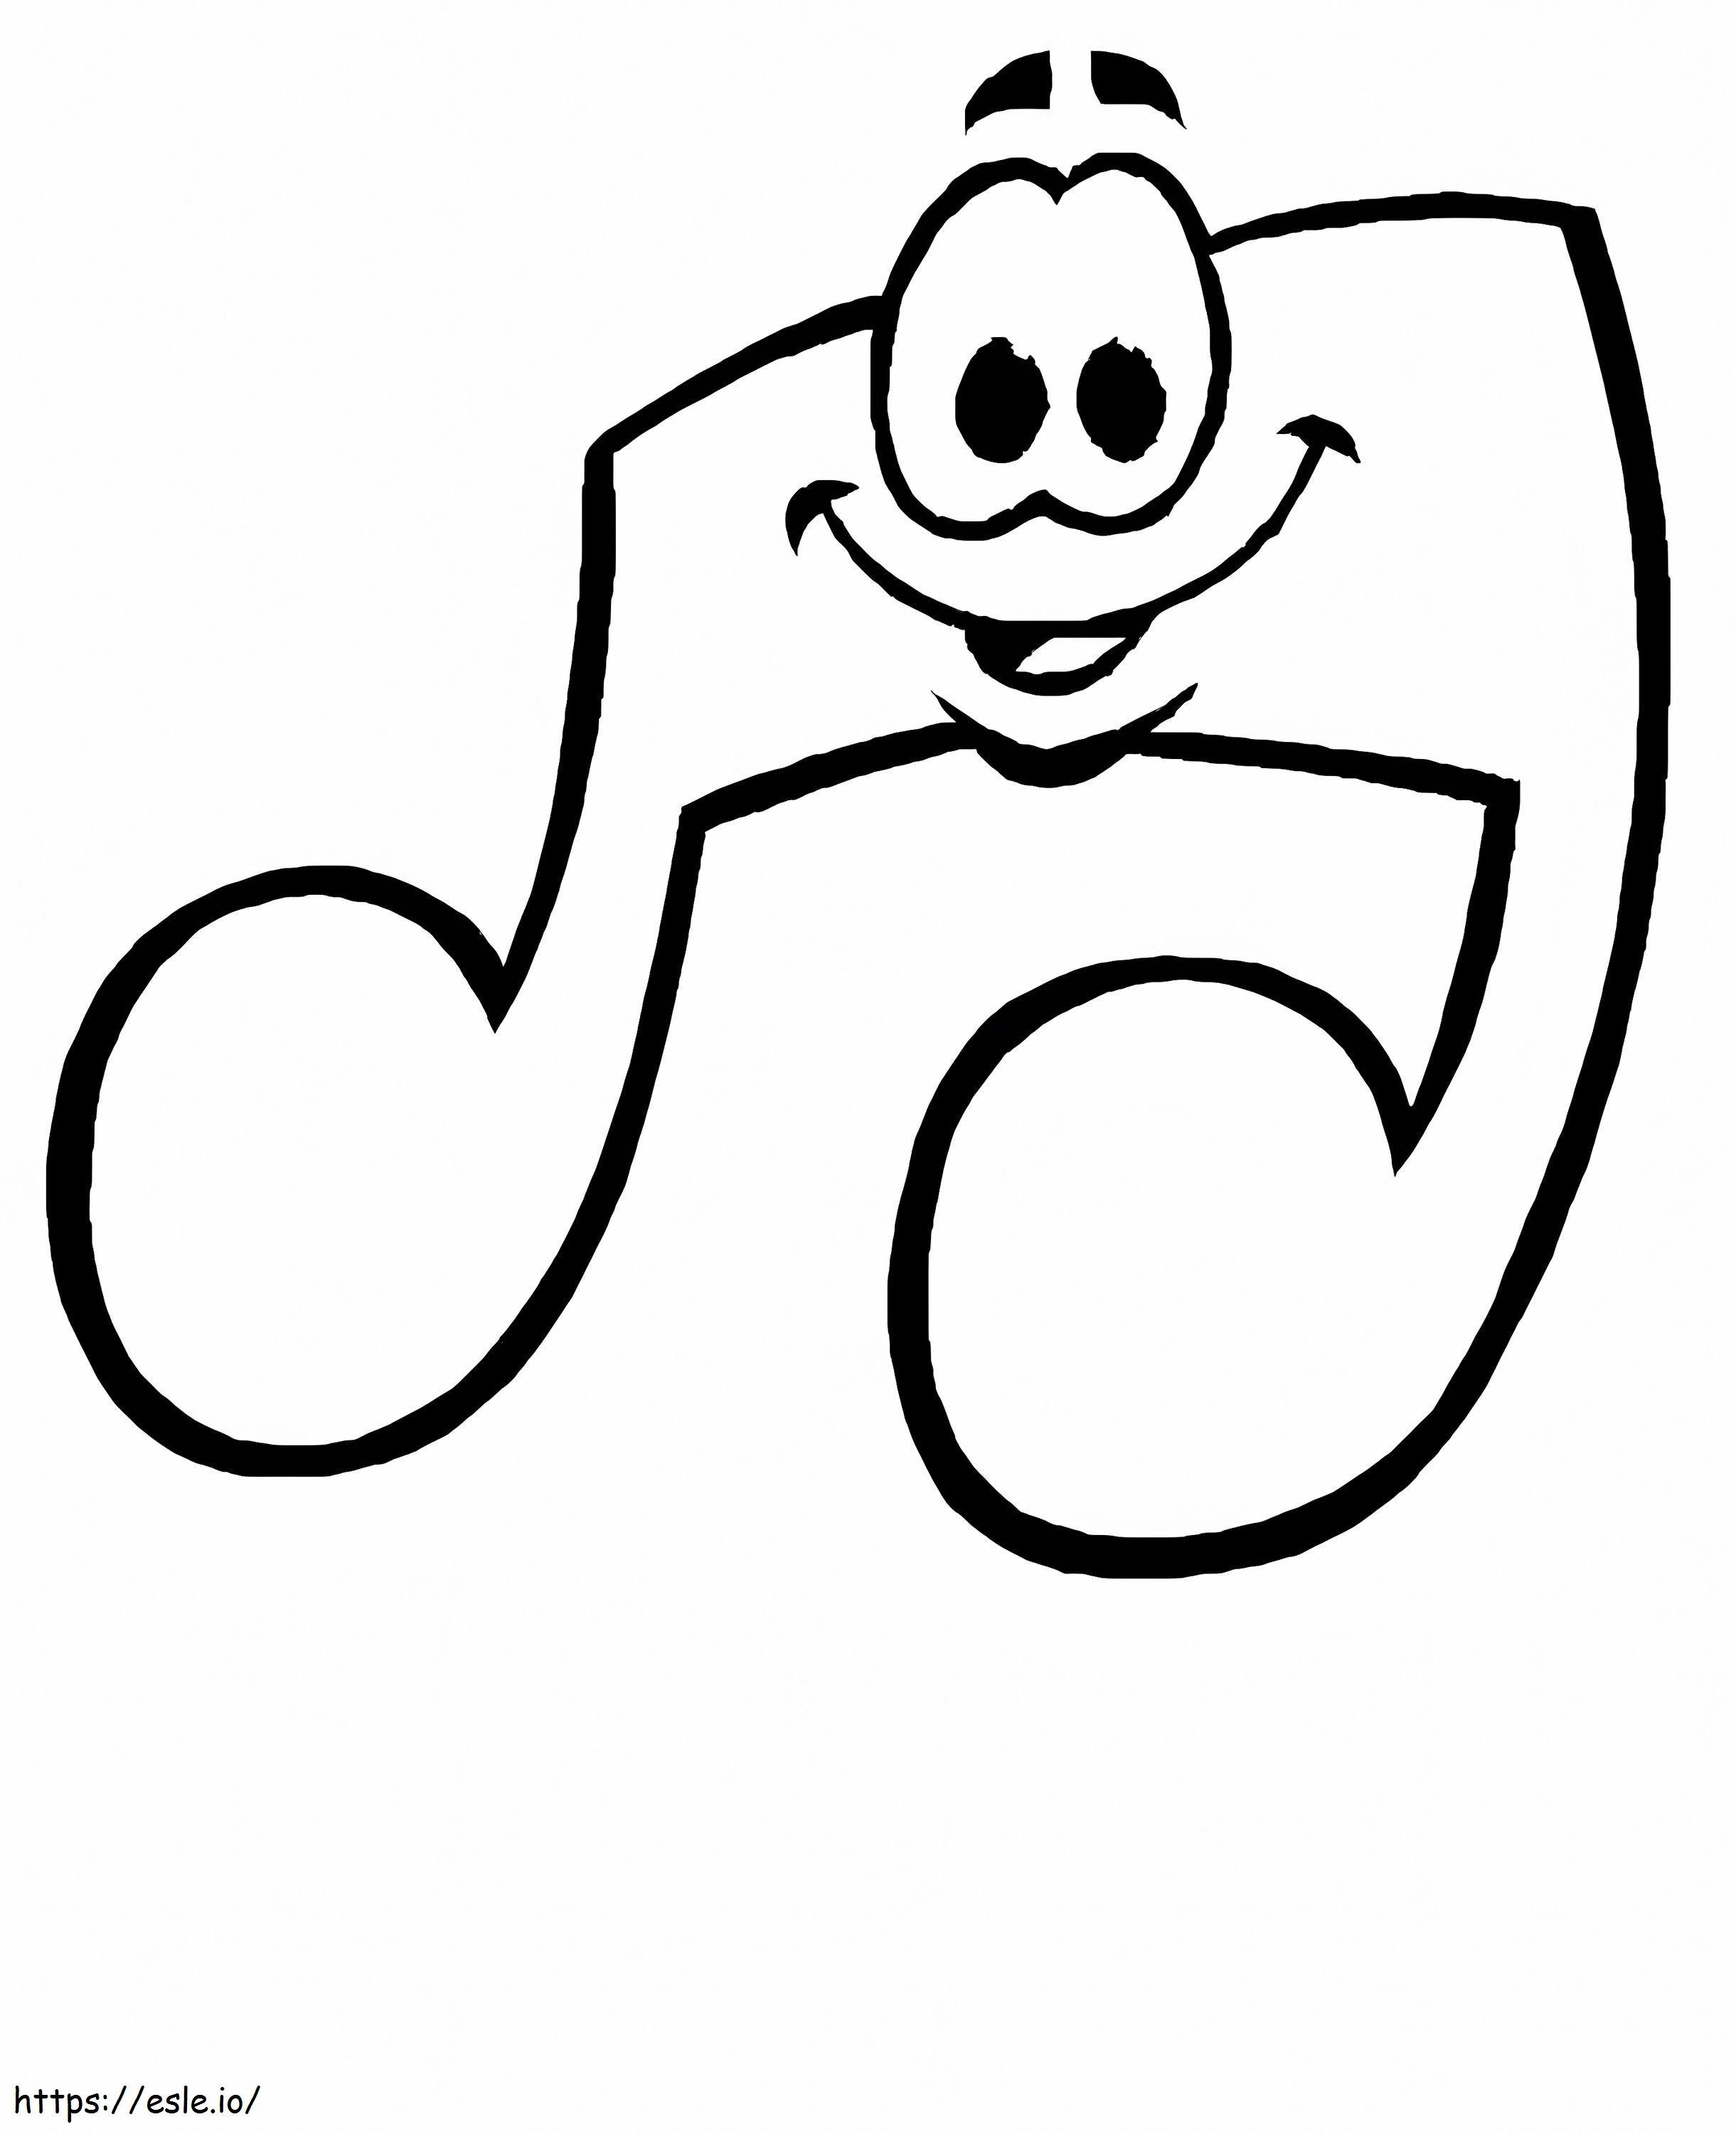 Eighth Notes Smiling coloring page